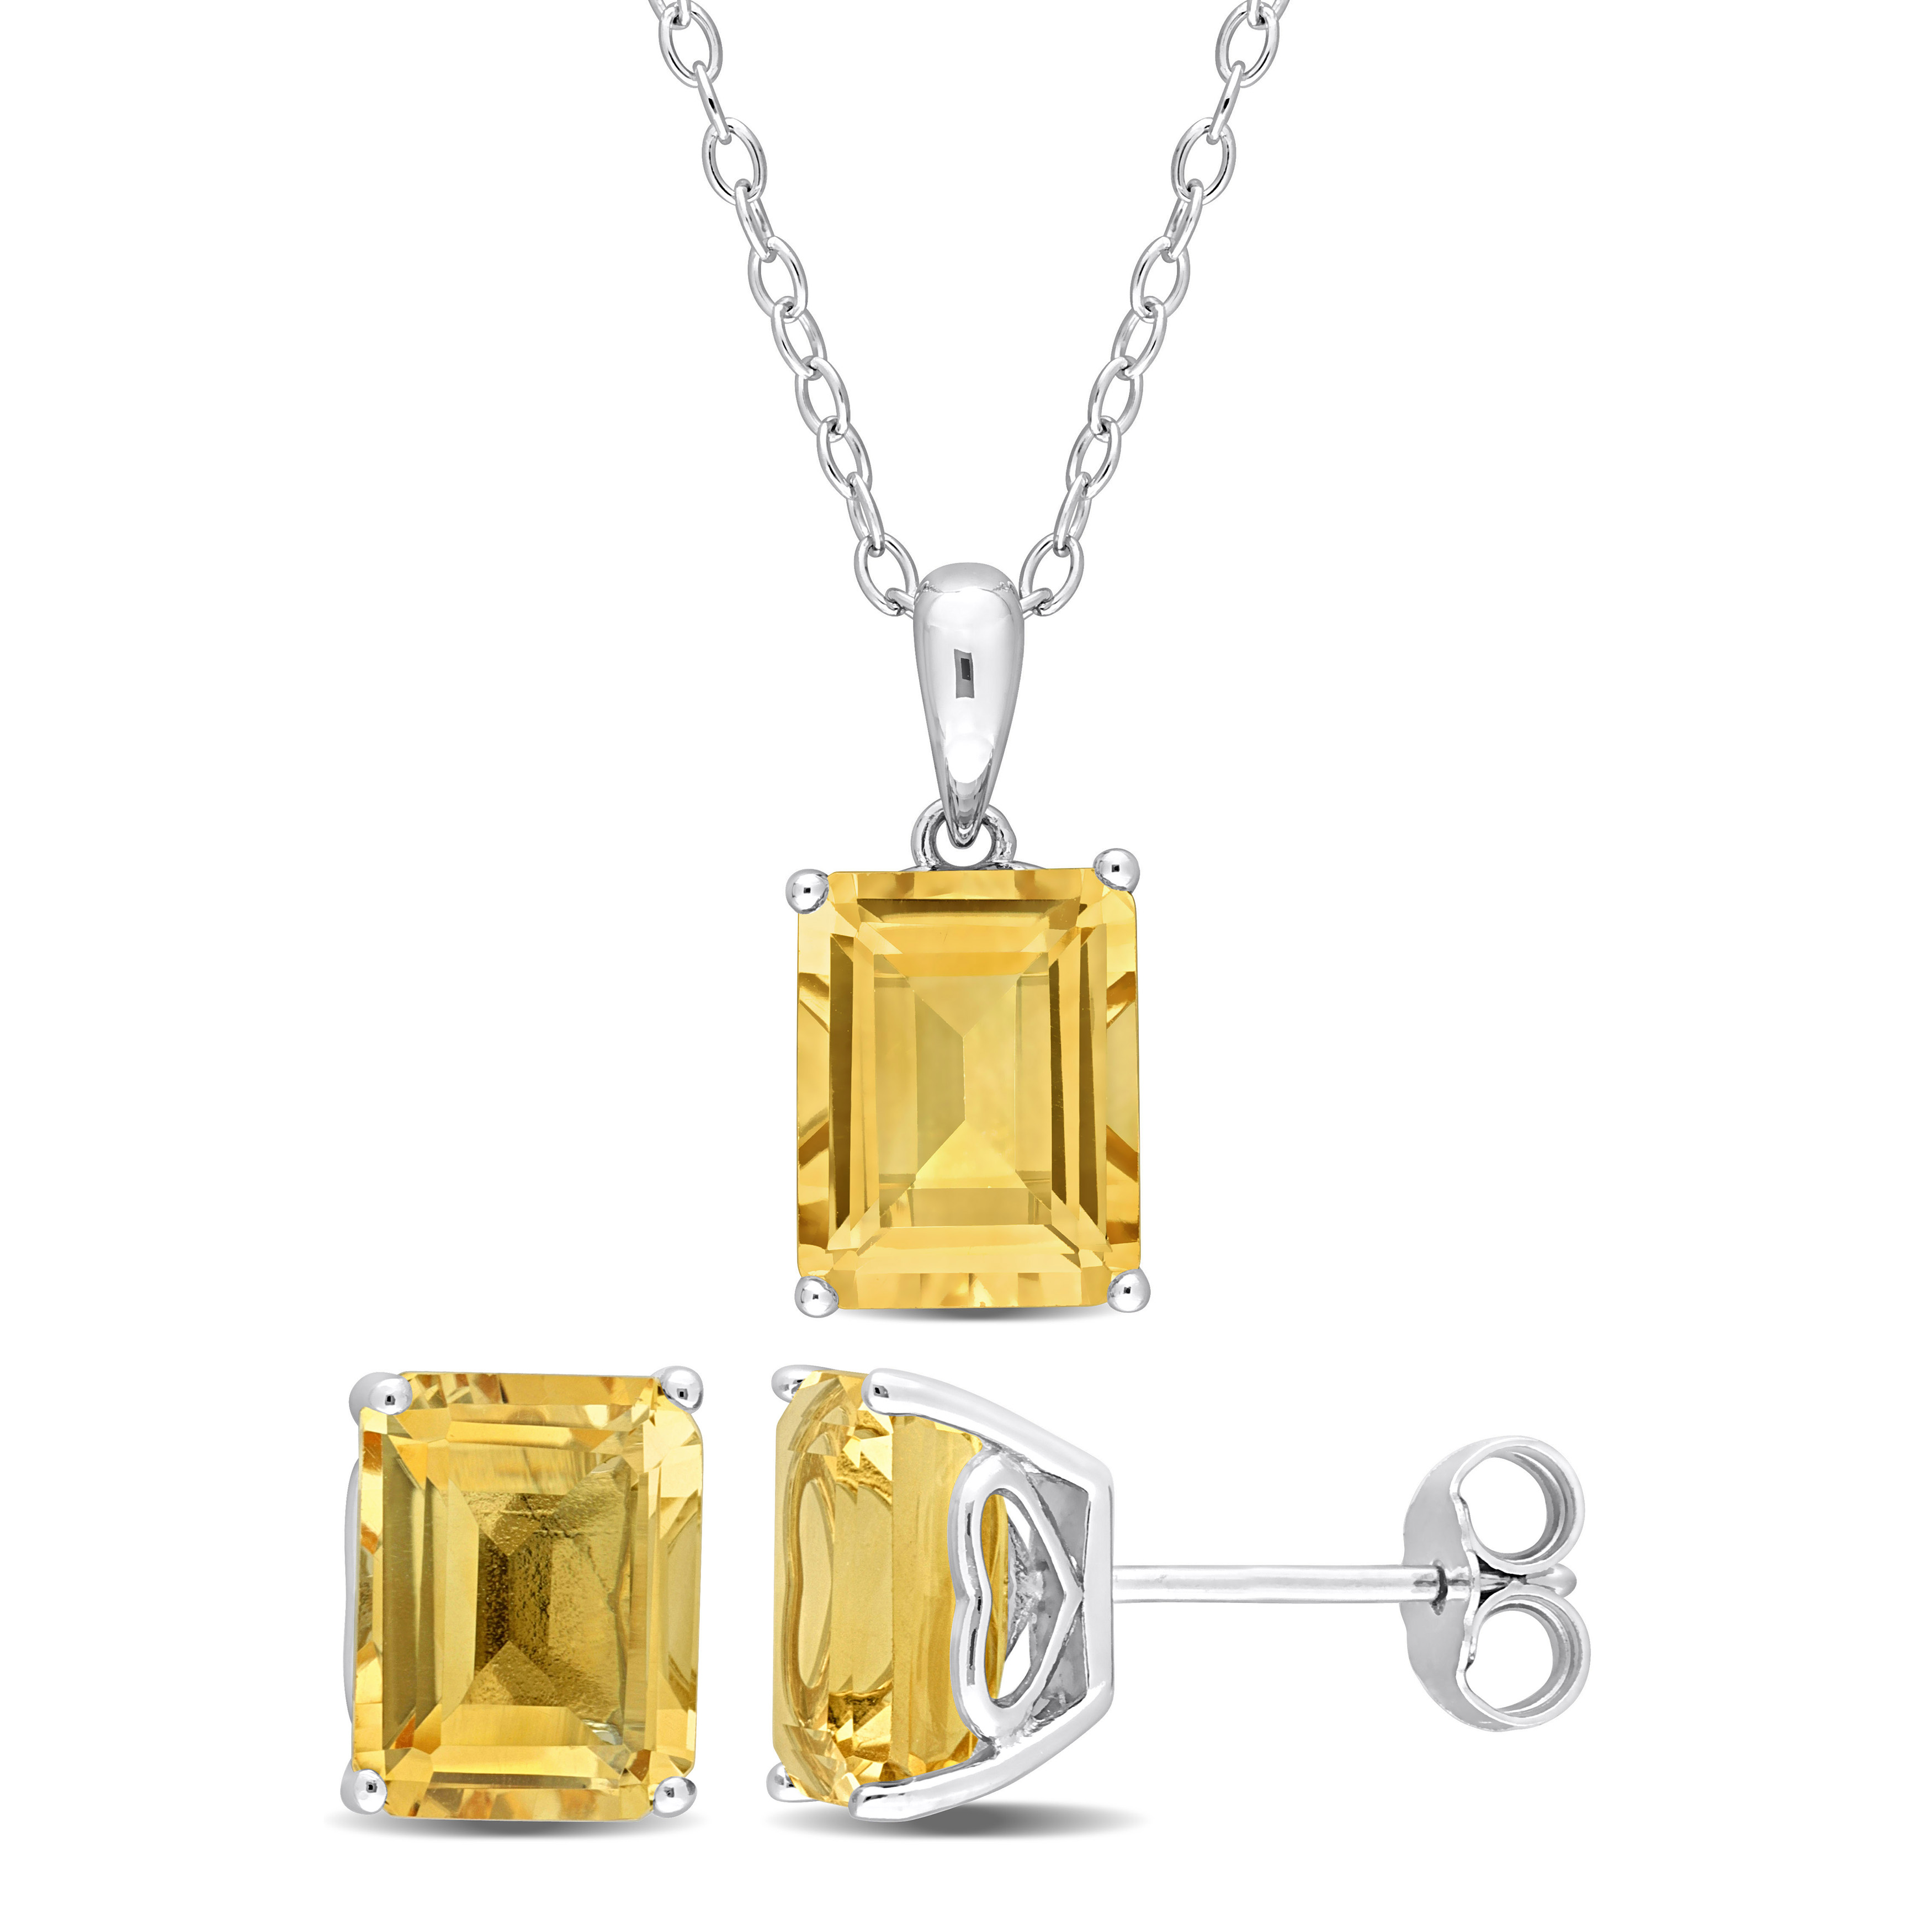 7 CT TGW Emerald-Cut and Octagon Citrine 2-Piece Set of Pendant with Chain and Earrings in Sterling Silver